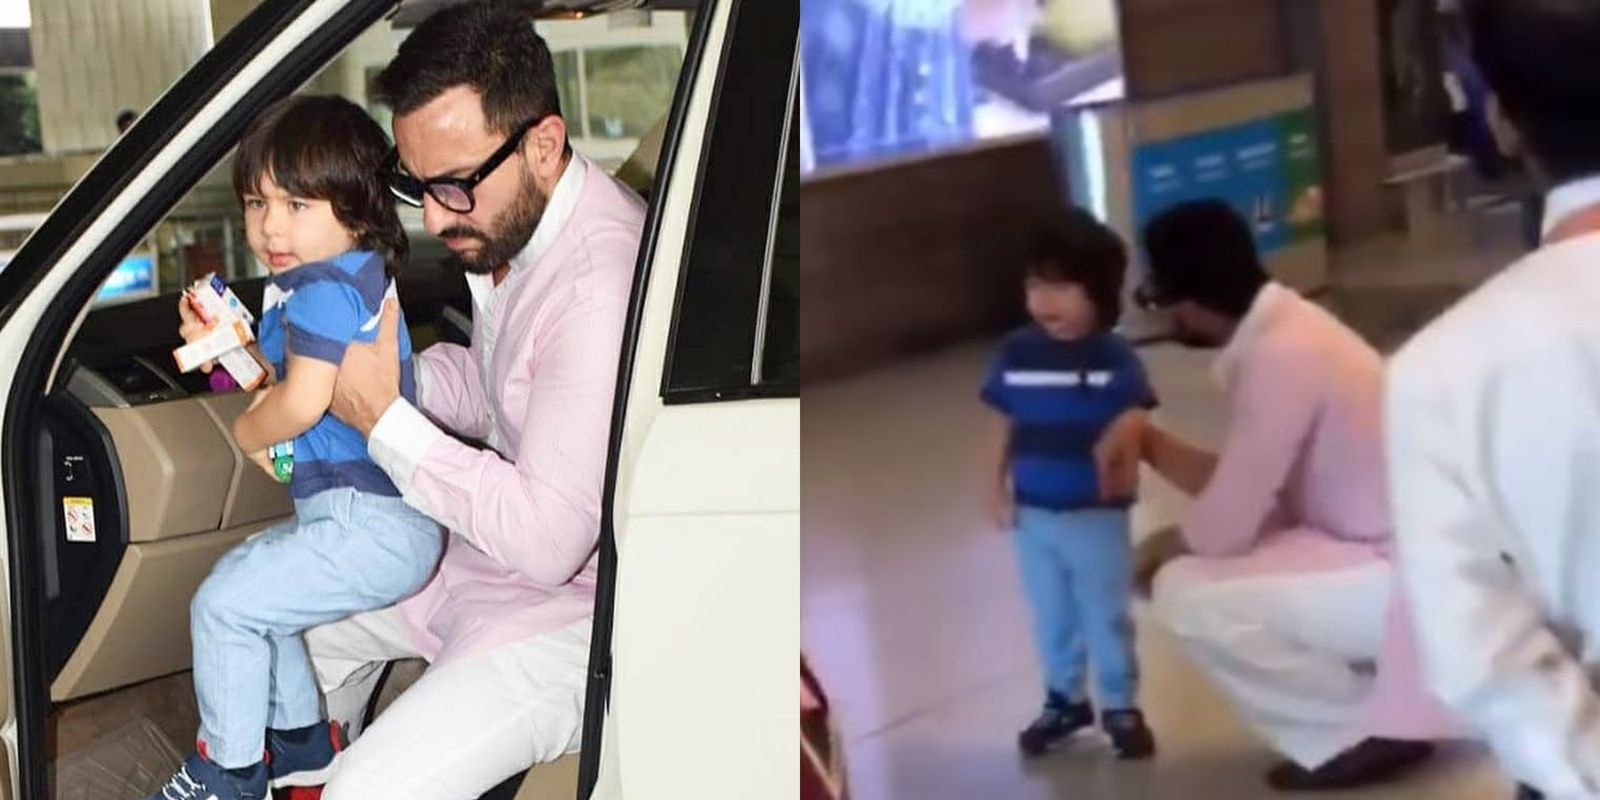 Taimur Ali Khan Cries At The Airport While Saif Ali Khan Patiently Consoles Him, Netizens Worry About The Munchkin Getting No Space